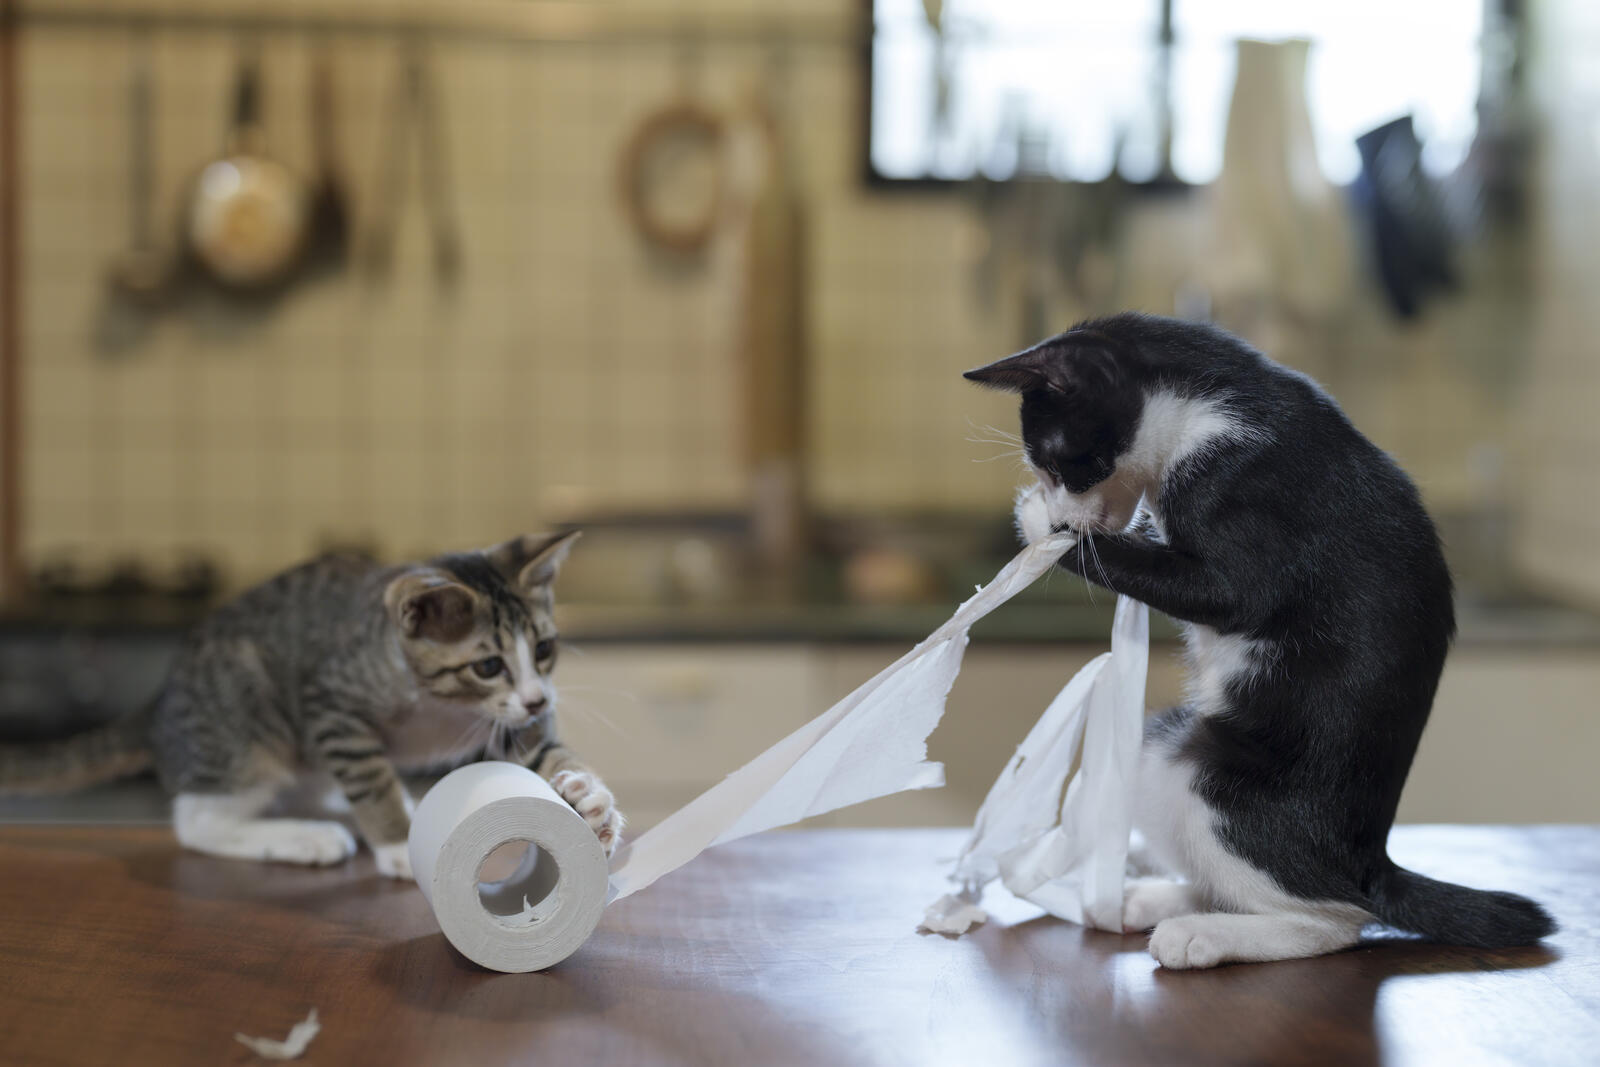 The Comedy Pet Photography Awards 2024 Atsuyuki Ohshima gato Kameoka Japan Title: Hard worker Description: They give their all in every situation. Animal: Cat Location of shot: Home